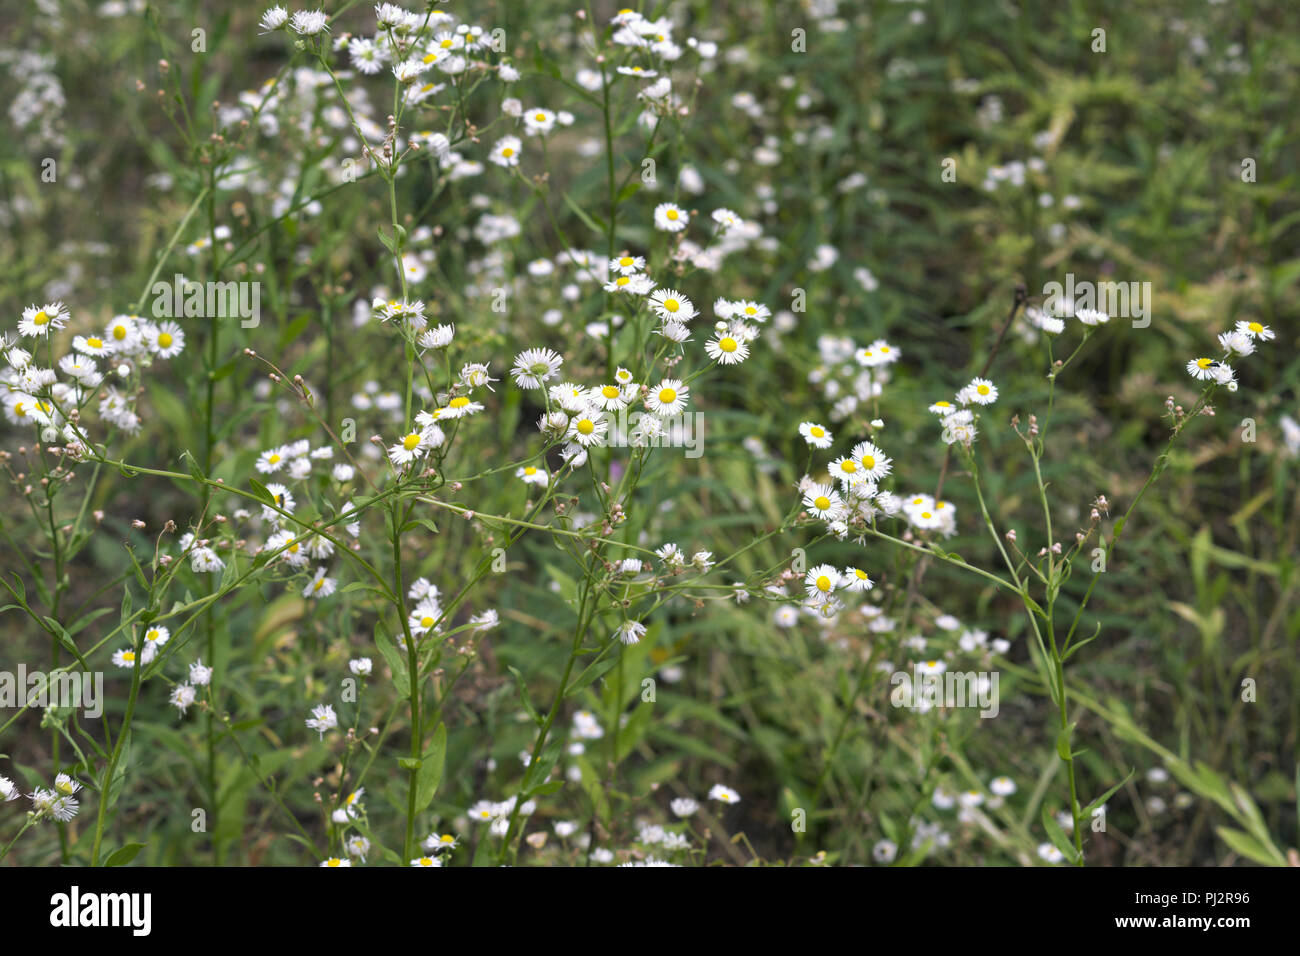 thickets of daisies. delicate flowers with a yellow center, surrounded by thin white petals, in center of floral forest glade. shallow depth of field Stock Photo